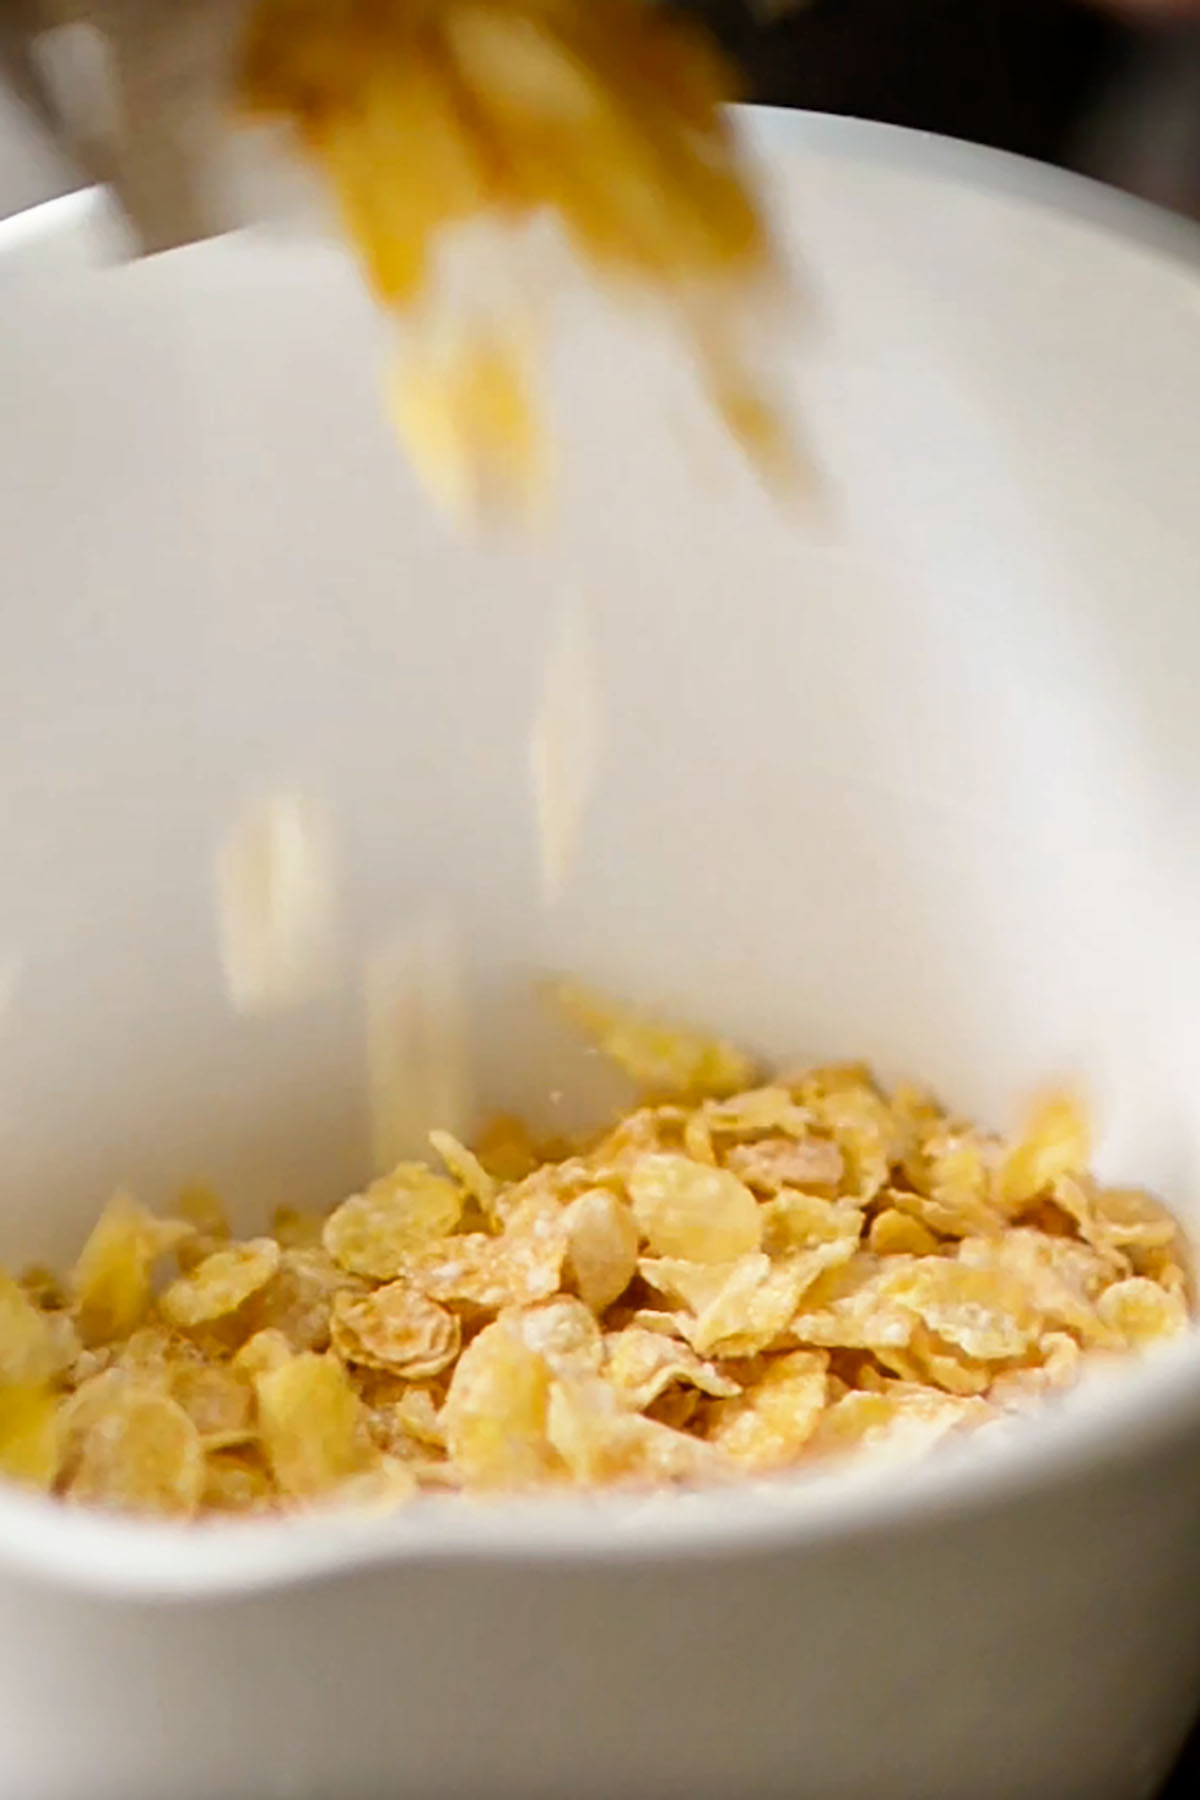 Frosted flakes being dumped in a white mixing bowl.